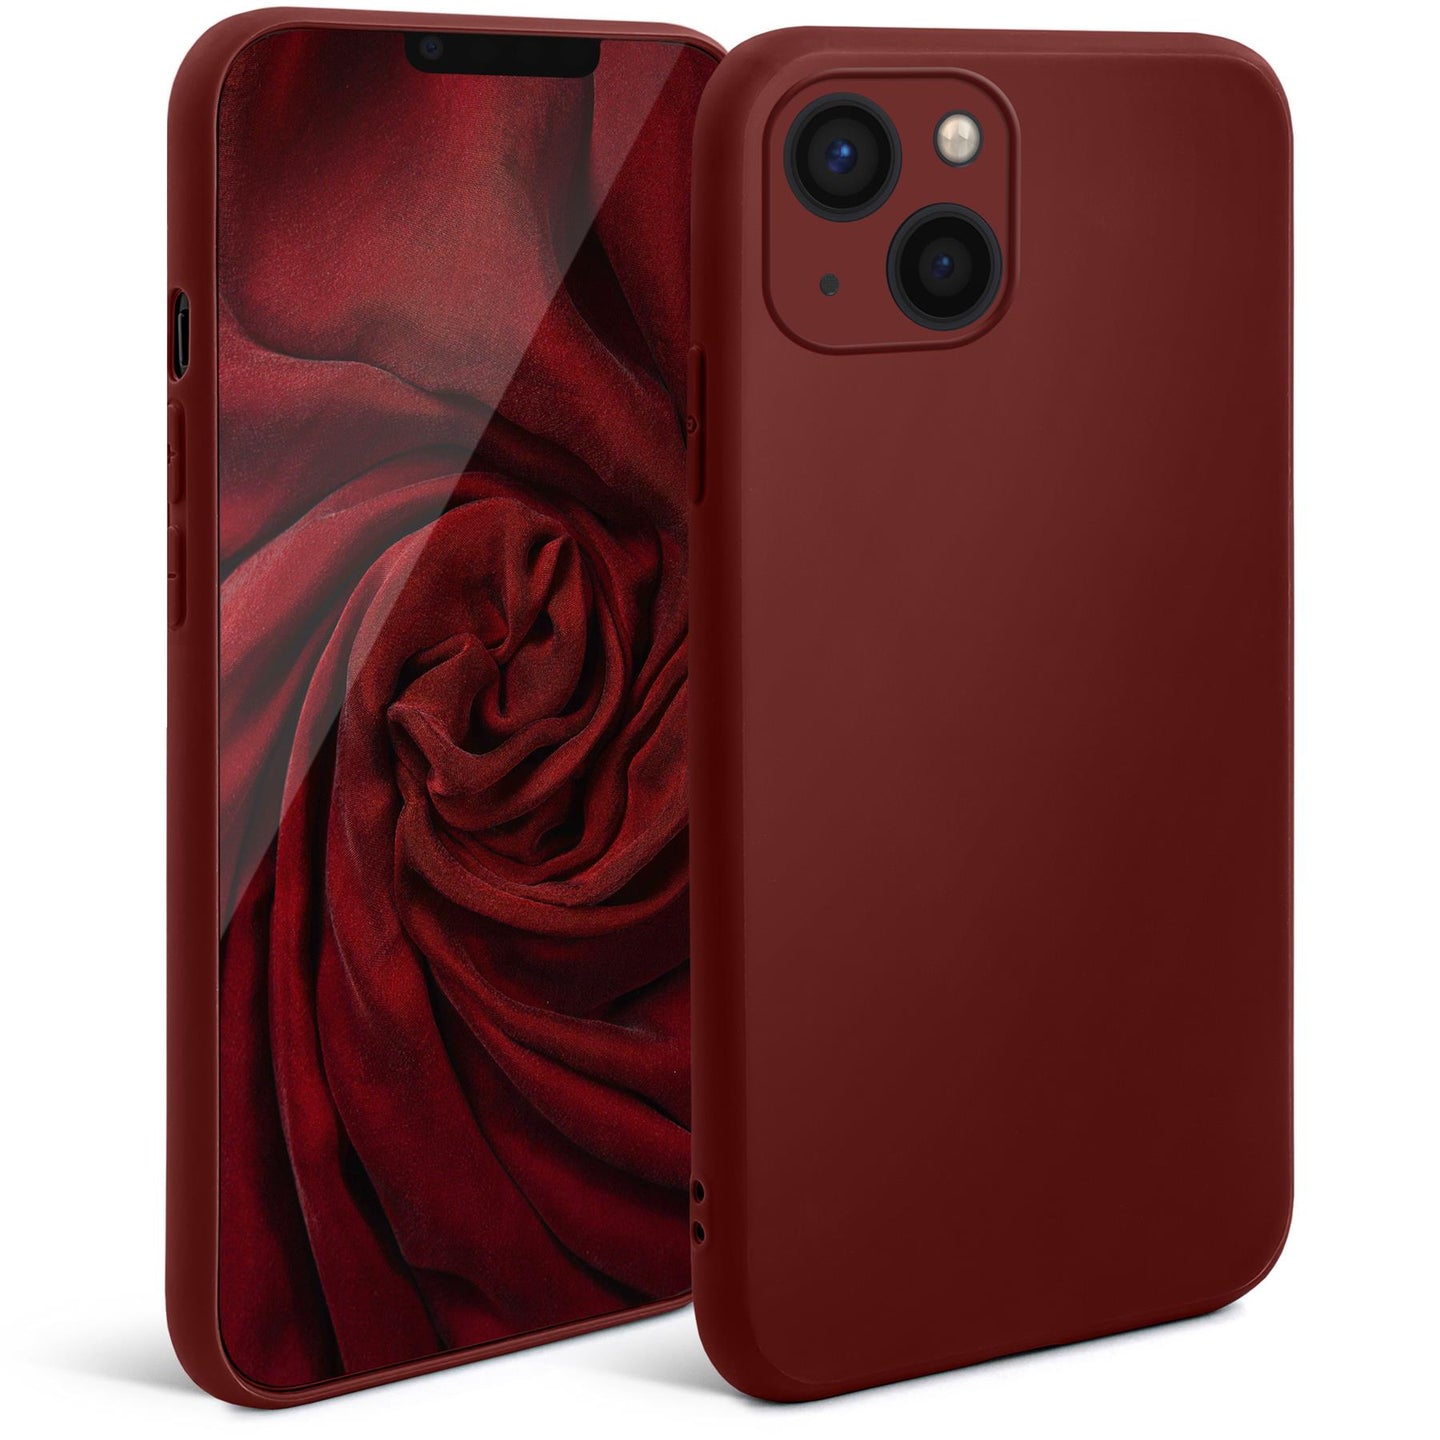 Moozy Minimalist Series Silicone Case for iPhone 13 Mini, Wine Red - Matte Finish Lightweight Mobile Phone Case Slim Soft Protective